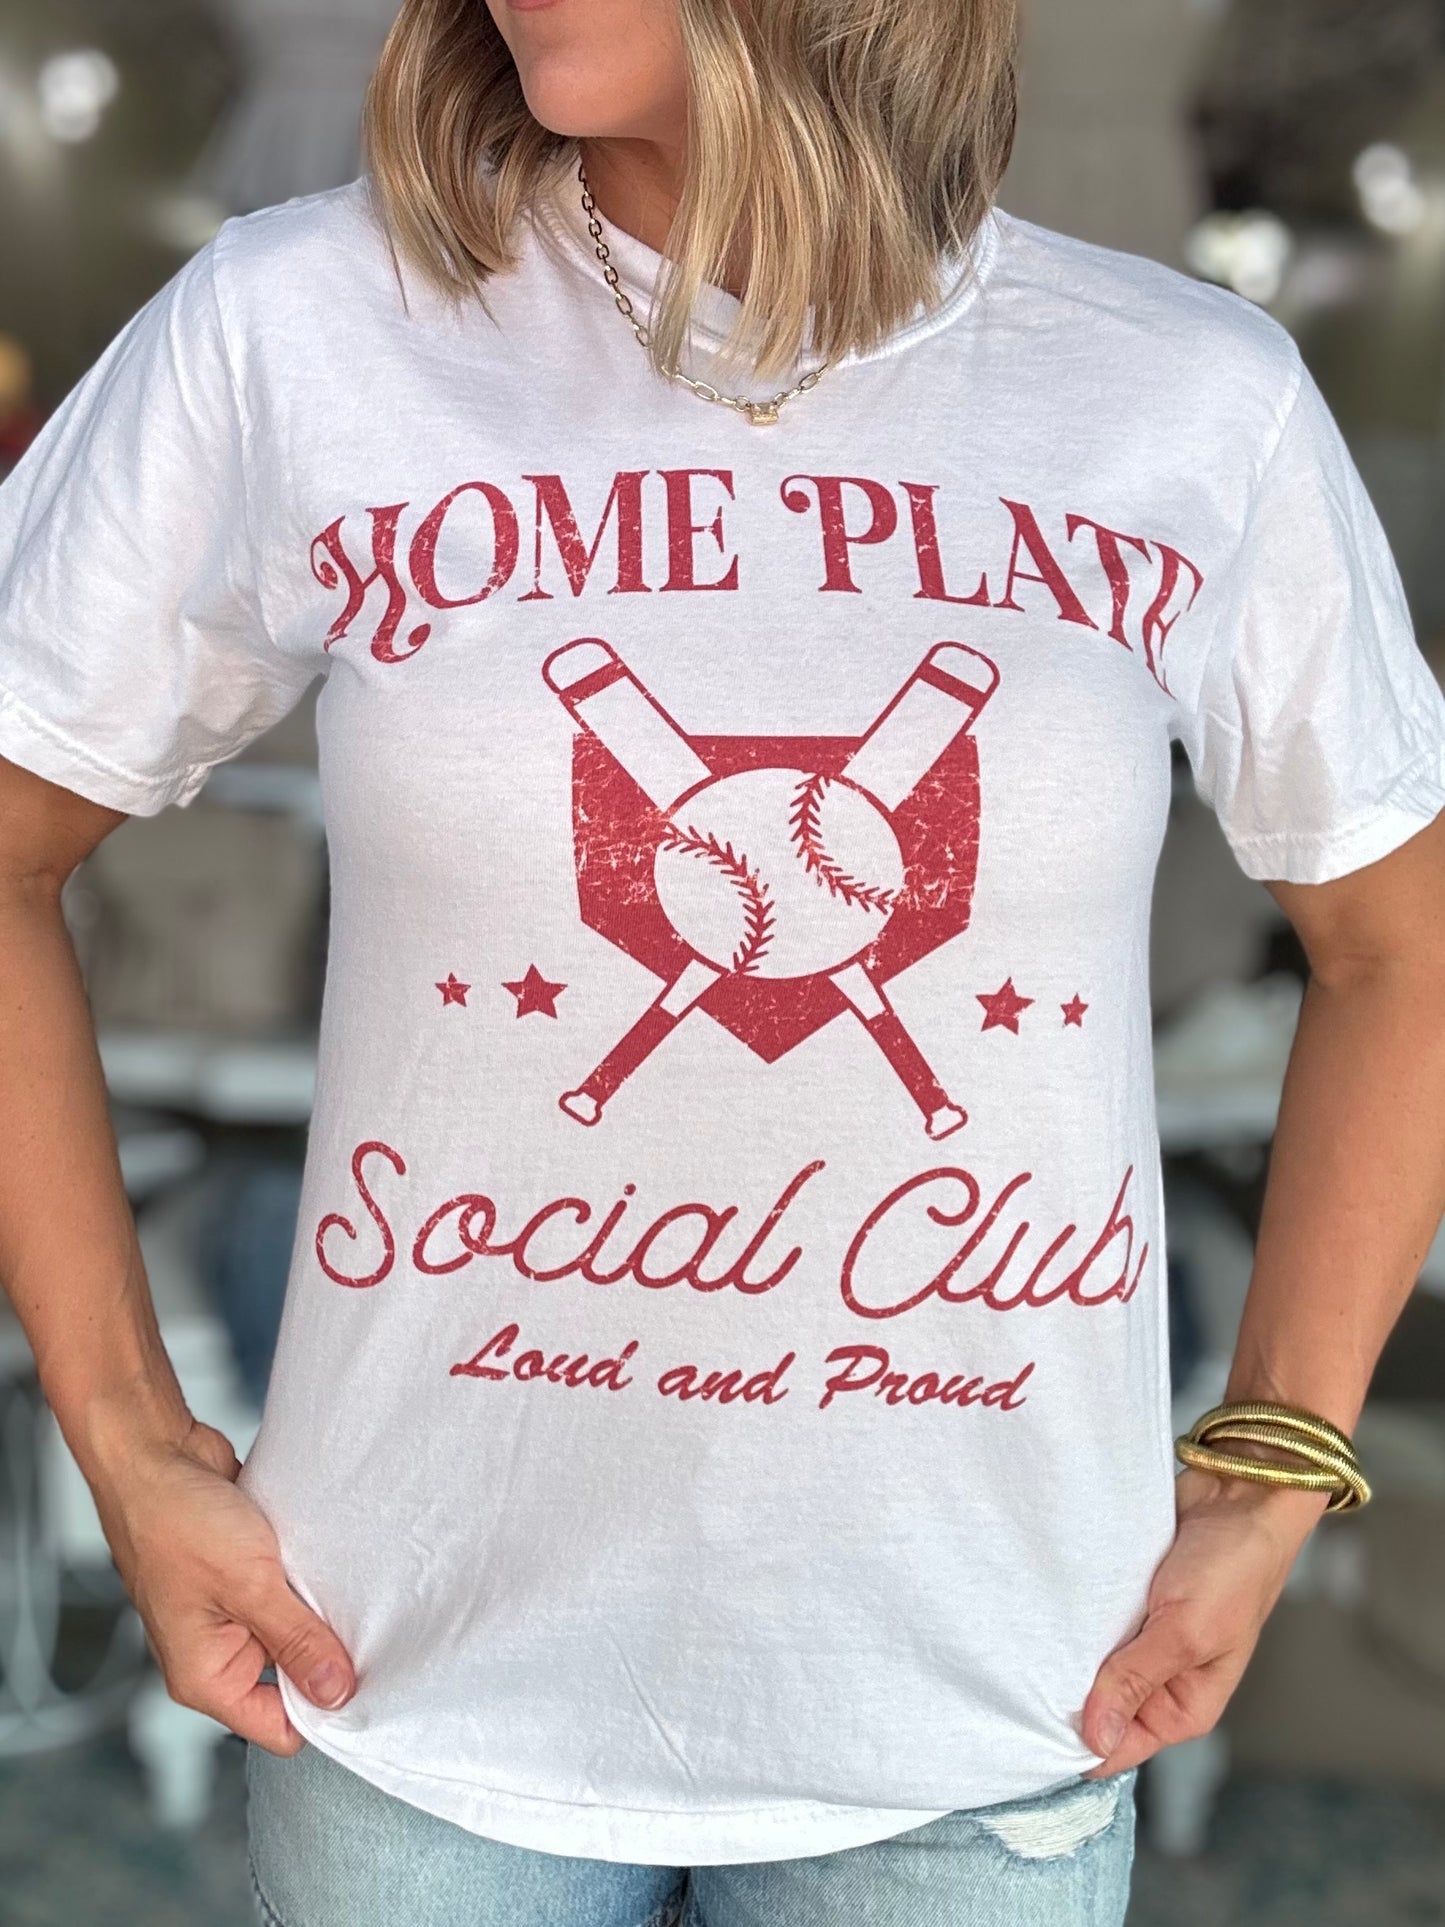 Home Plate Social Club Graphic Tee in White